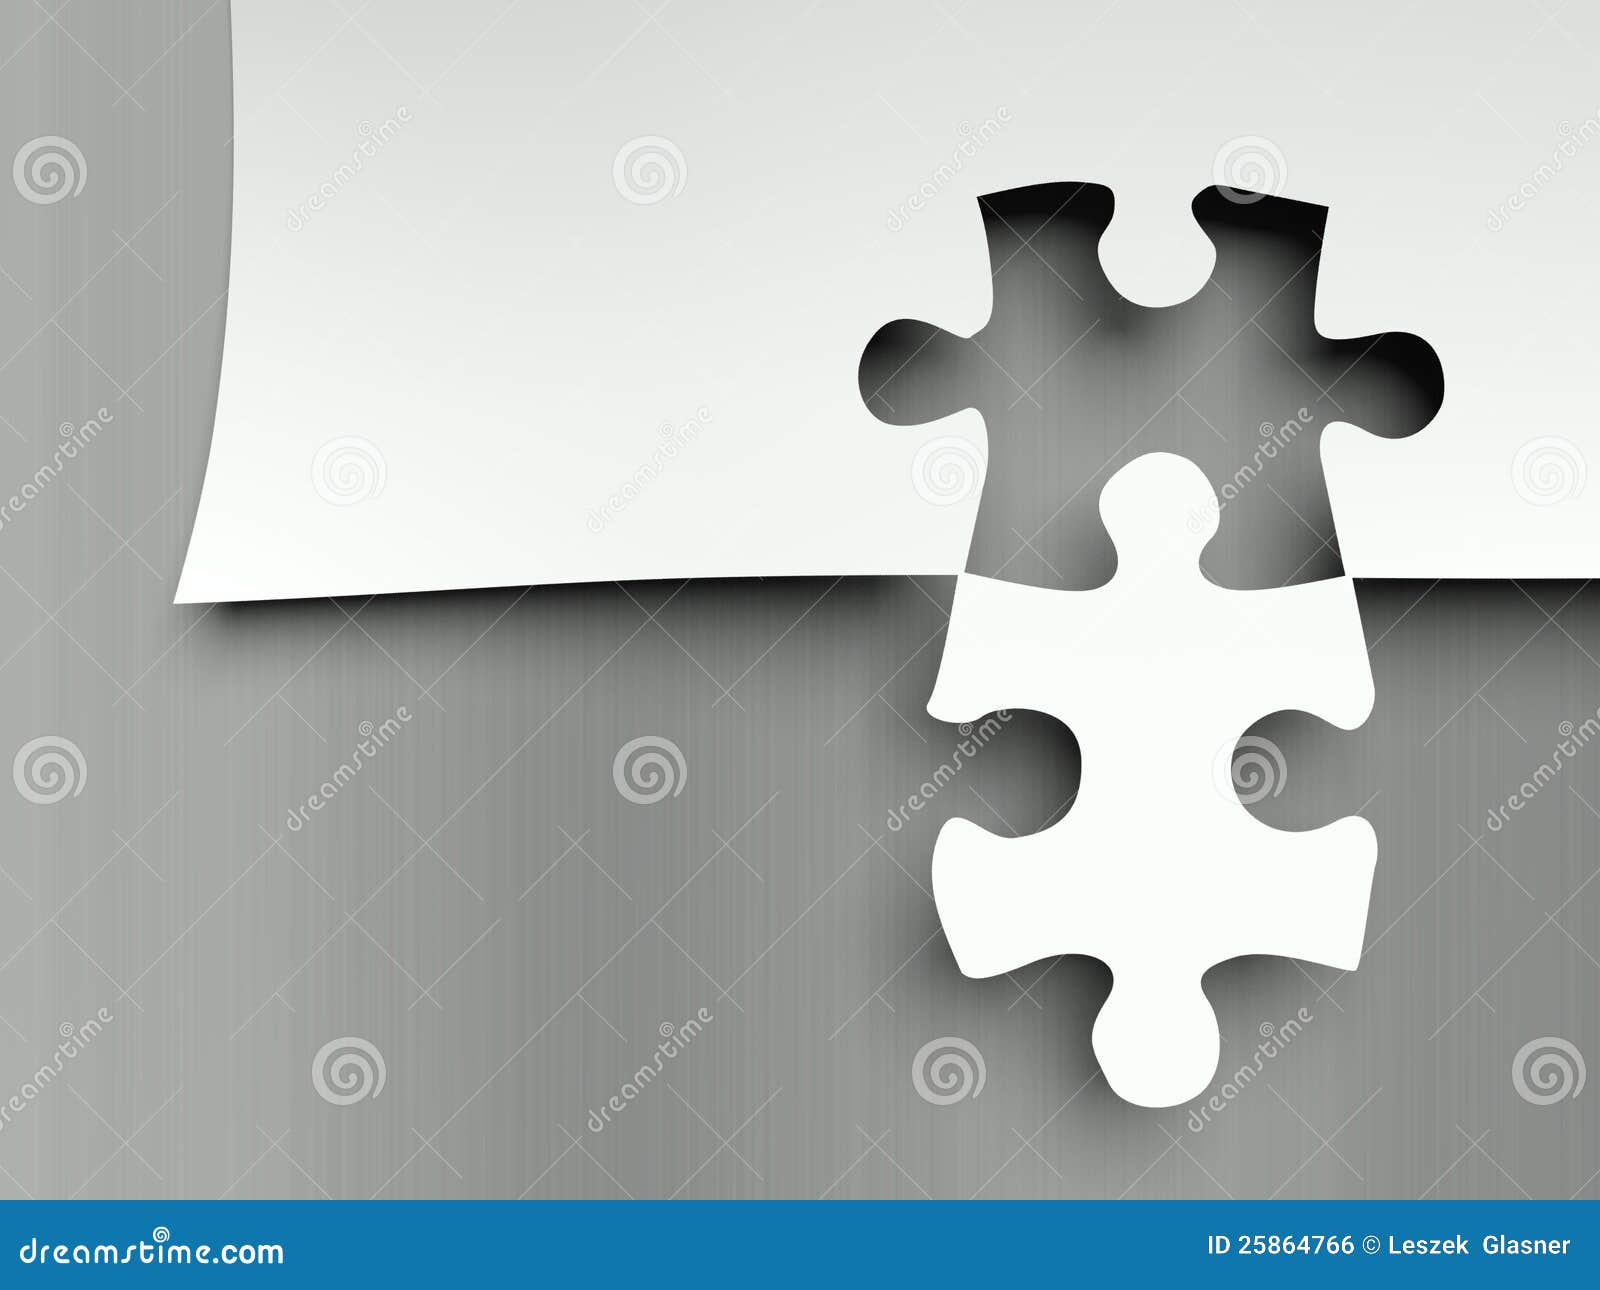 Matching Puzzle Pieces, Complement Metaphor Stock 